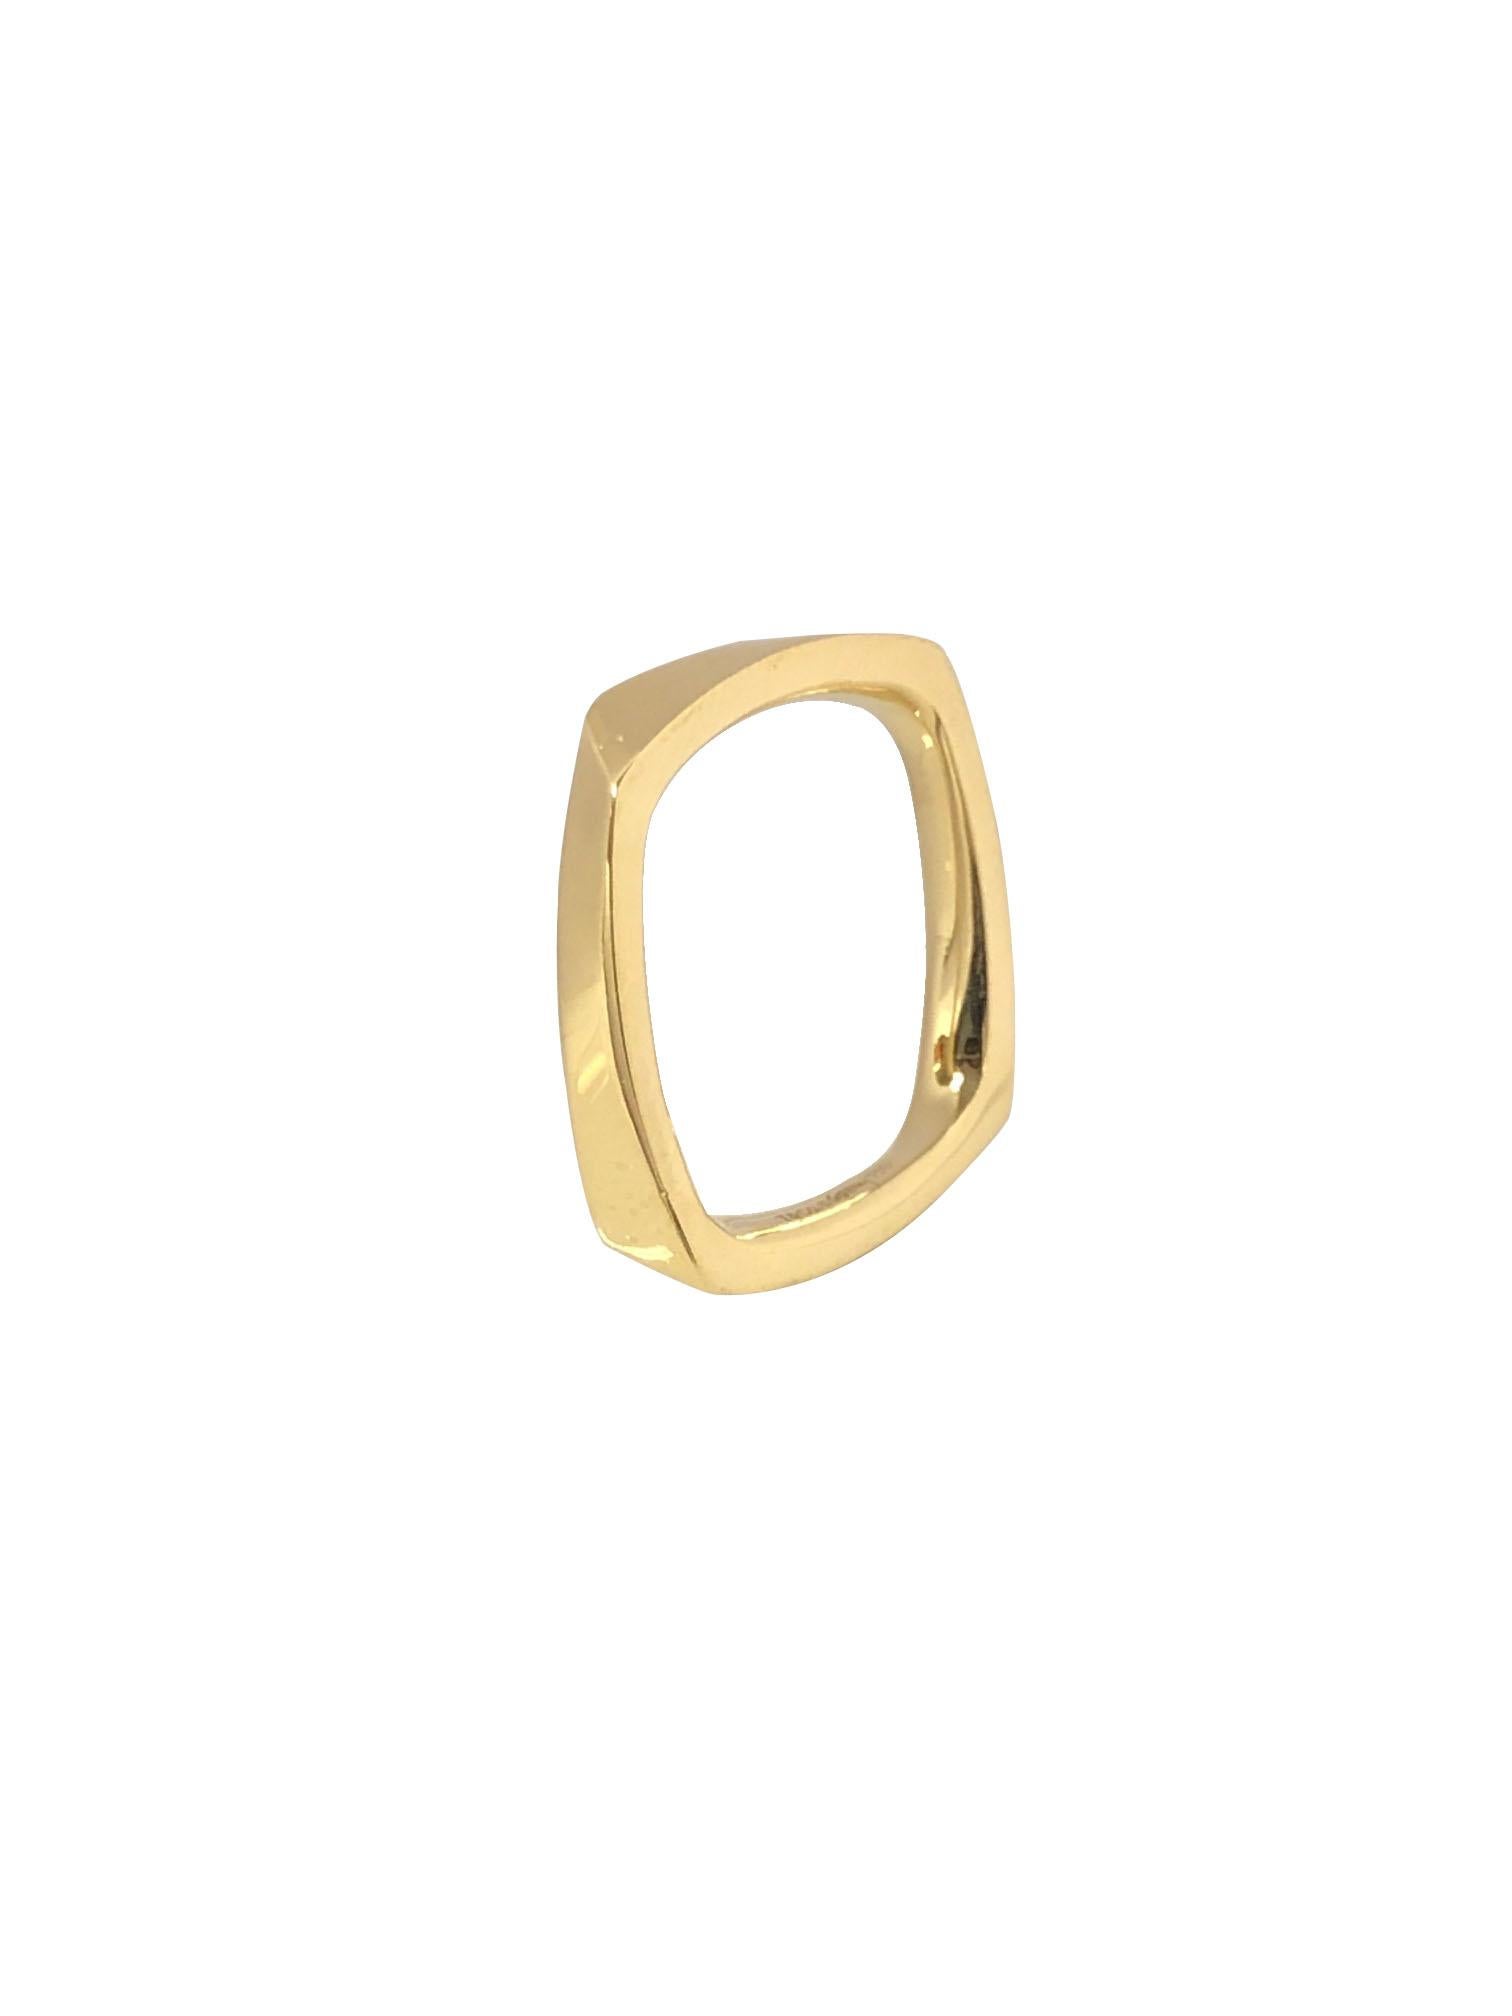 frank gehry torque ring